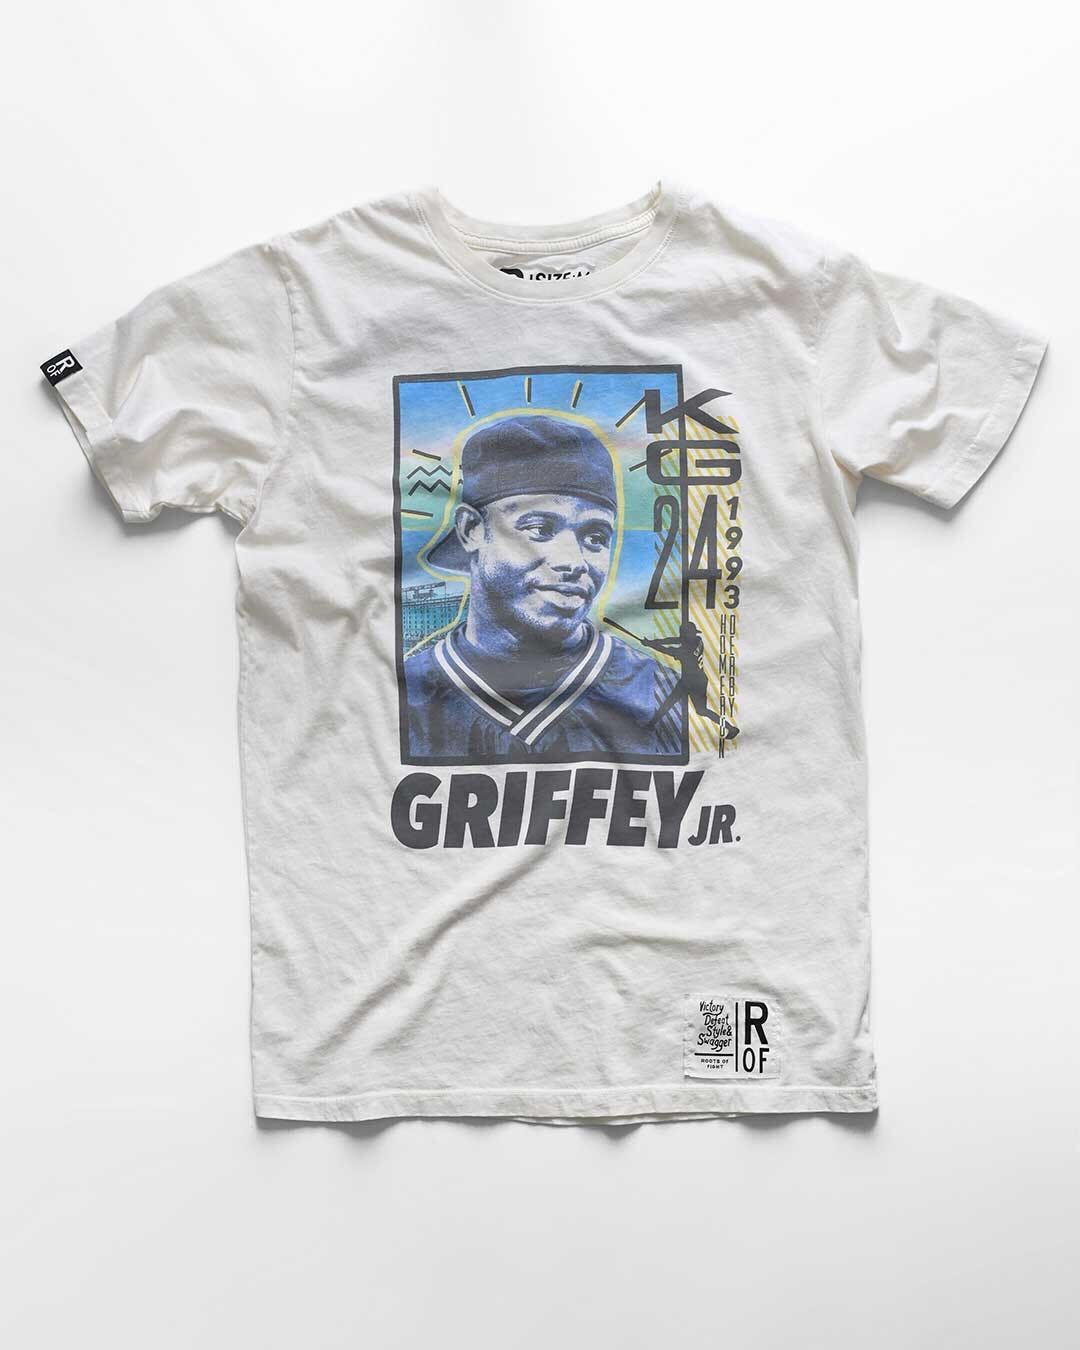 Ken Griffey Jr. Home Run Derby Photo Tee - Roots of Fight Canada